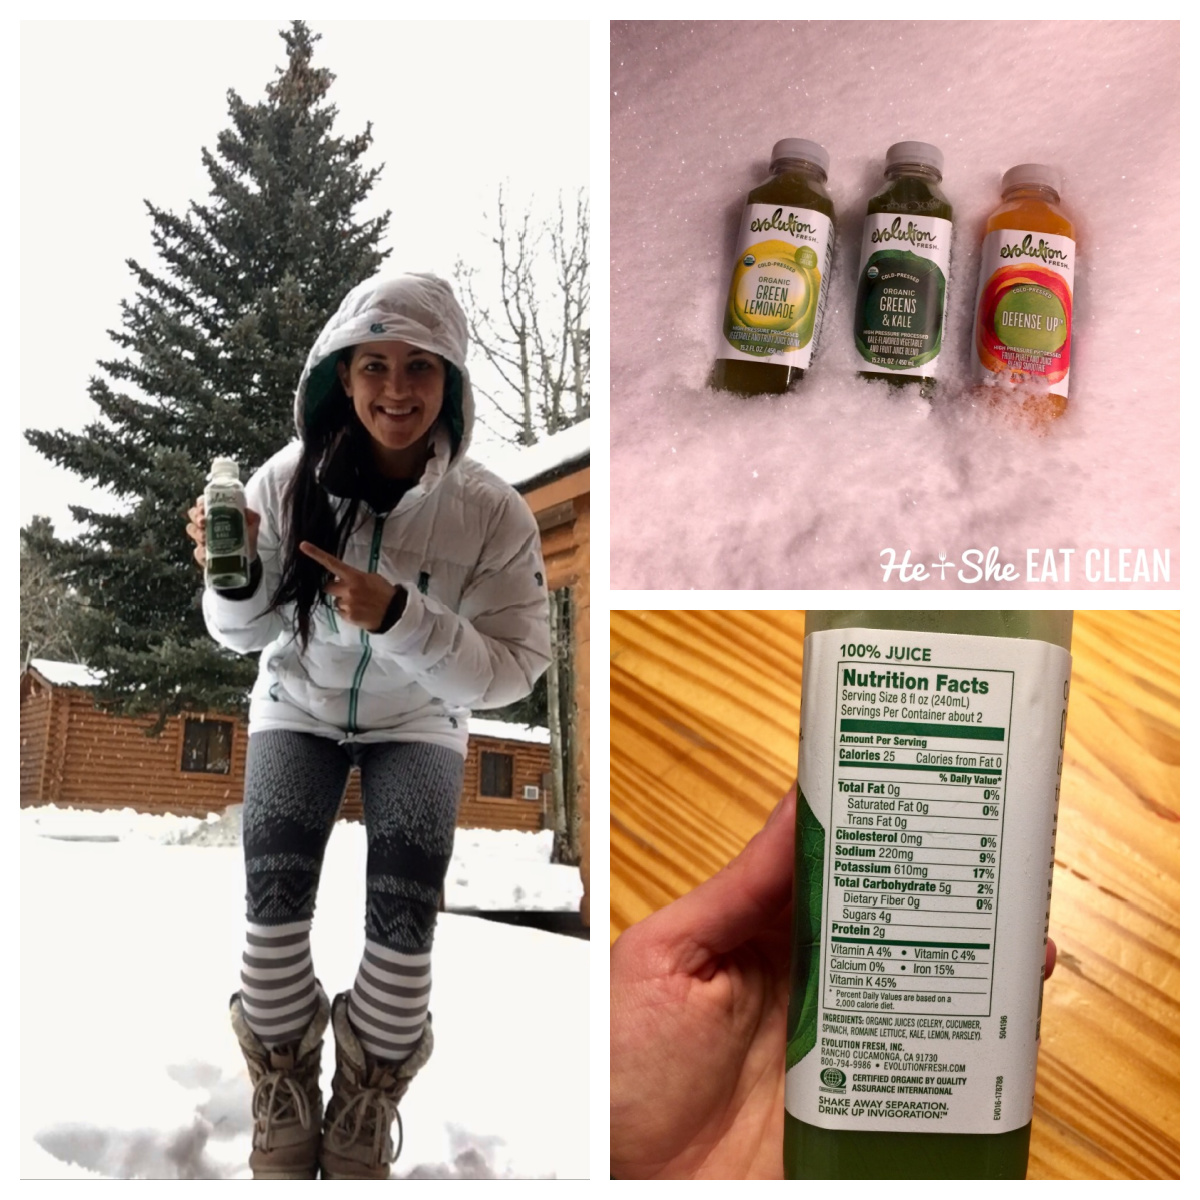 collage of 3 pictures. Female in a snow jacket, Evolution juices in the snow, and nutritional label